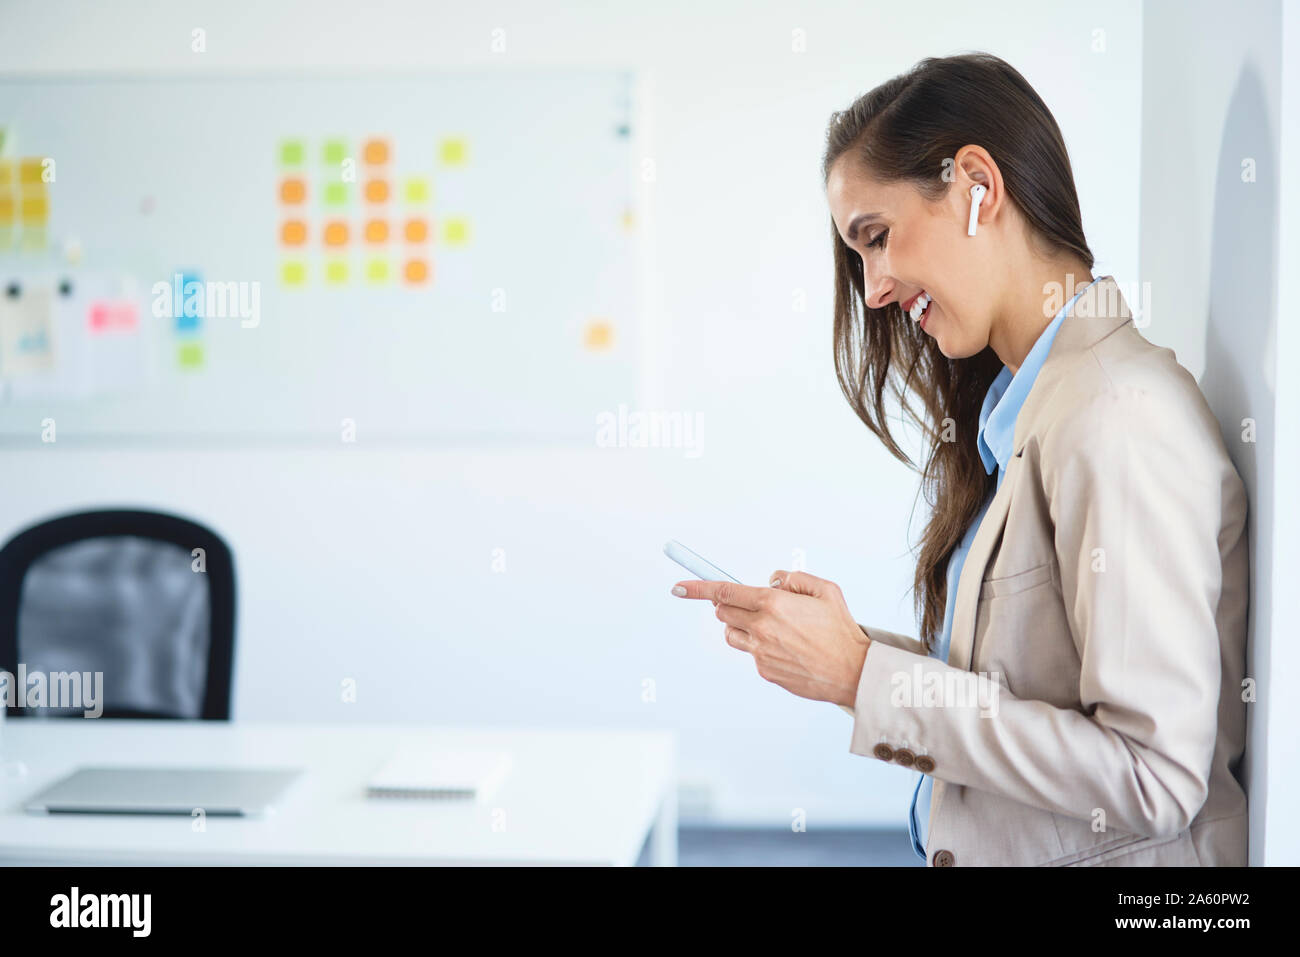 Young businesswoman standing in office using phone and wireless earphones Stock Photo